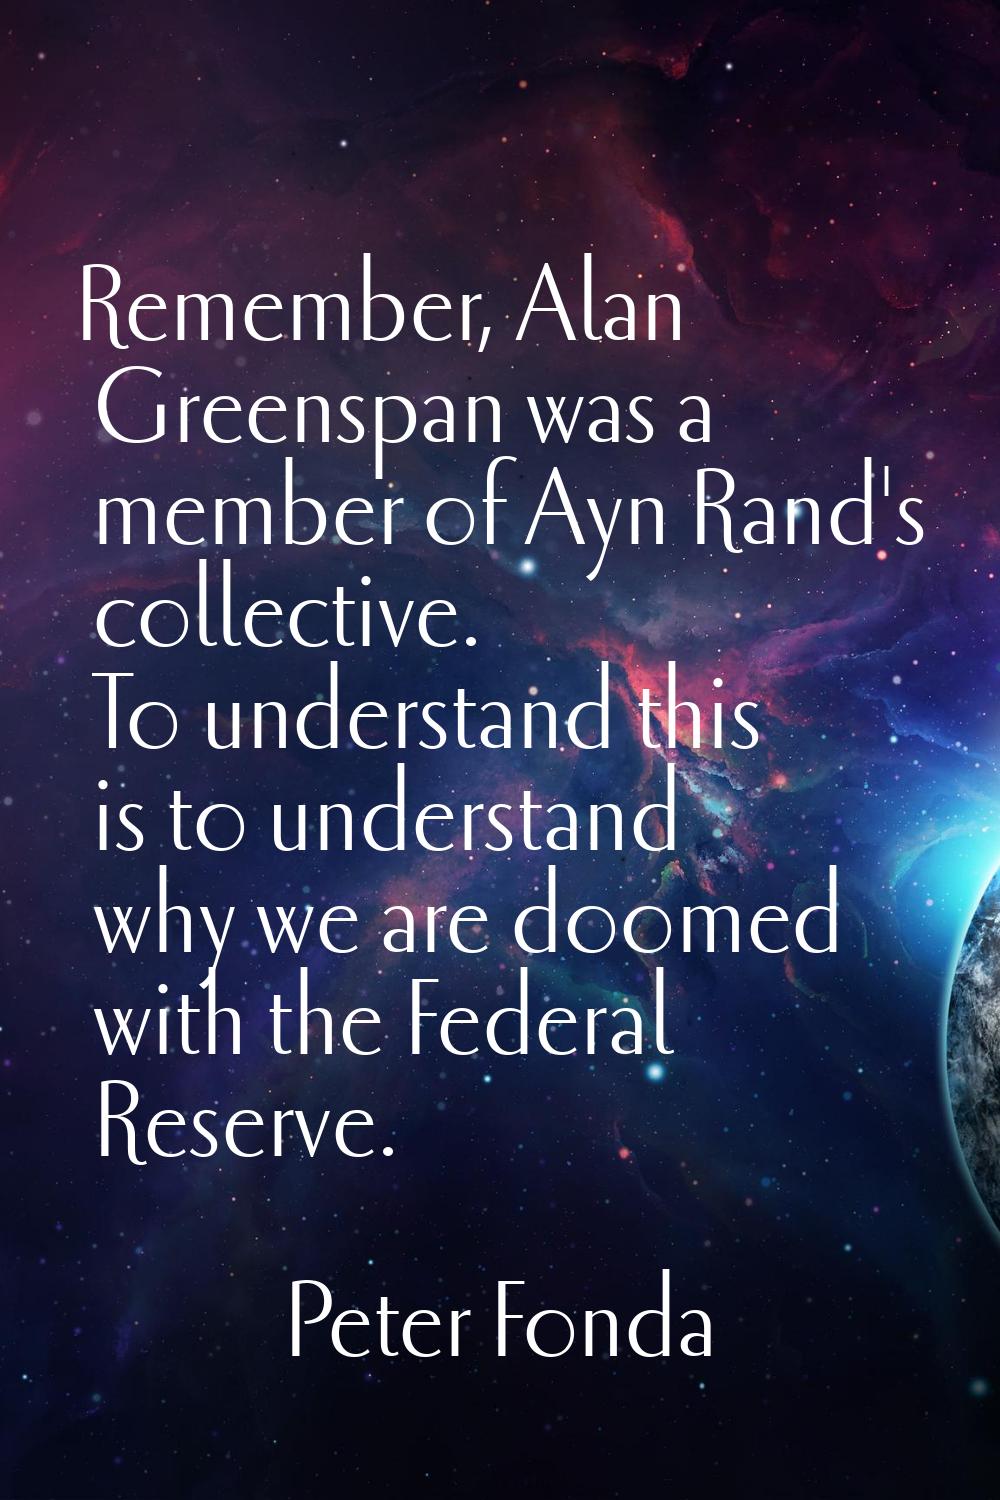 Remember, Alan Greenspan was a member of Ayn Rand's collective. To understand this is to understand